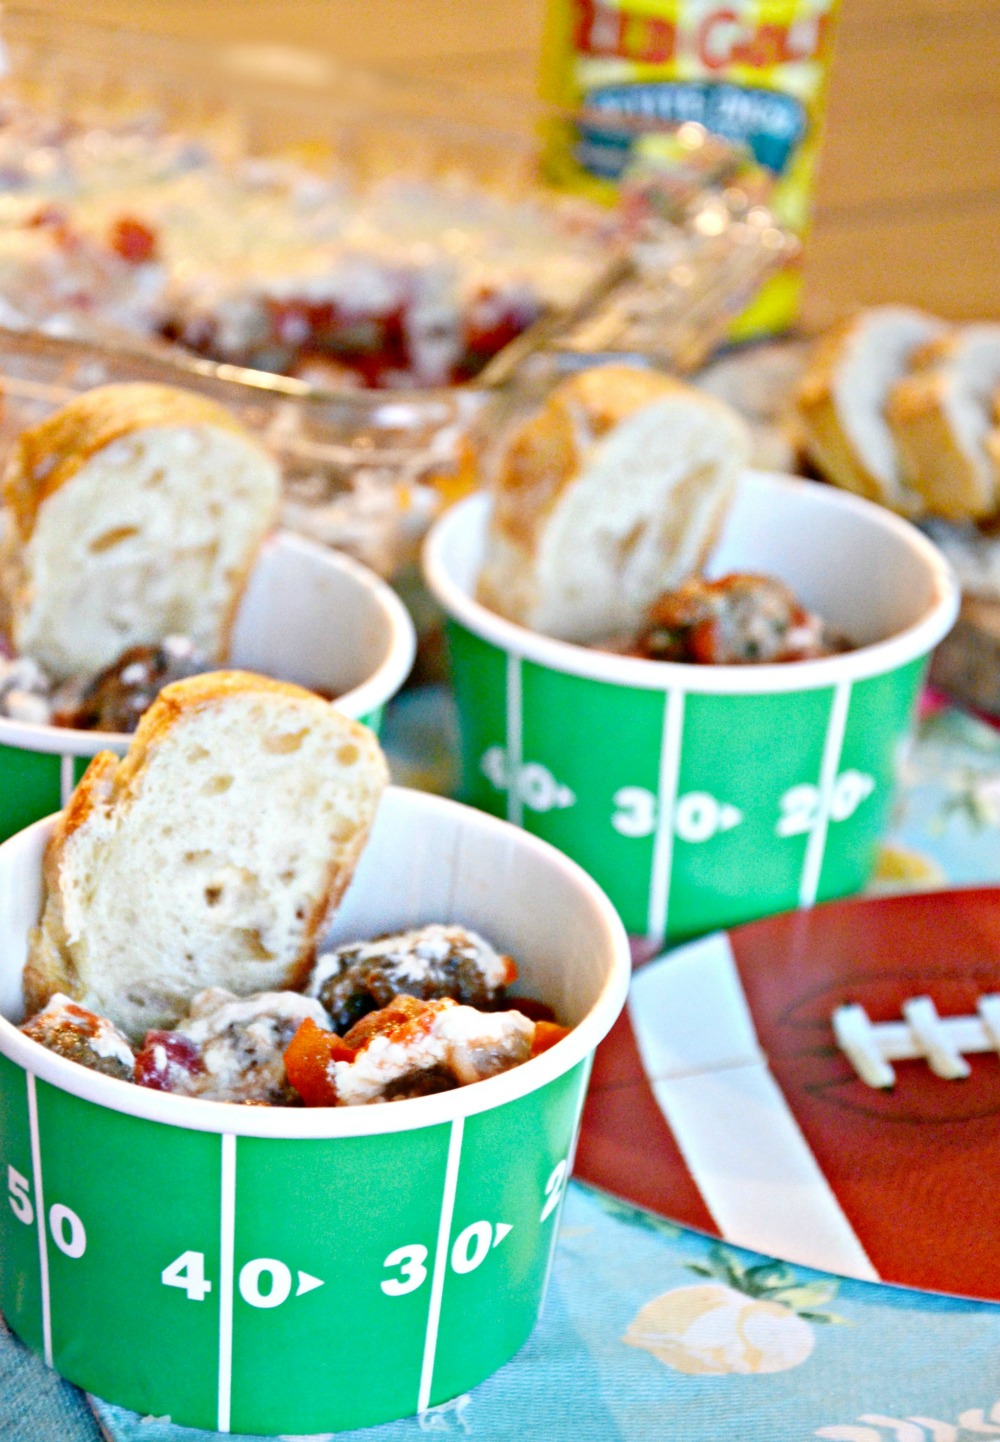 These Italian meatball dip cups with sliced bread are great for game day with family and friends.